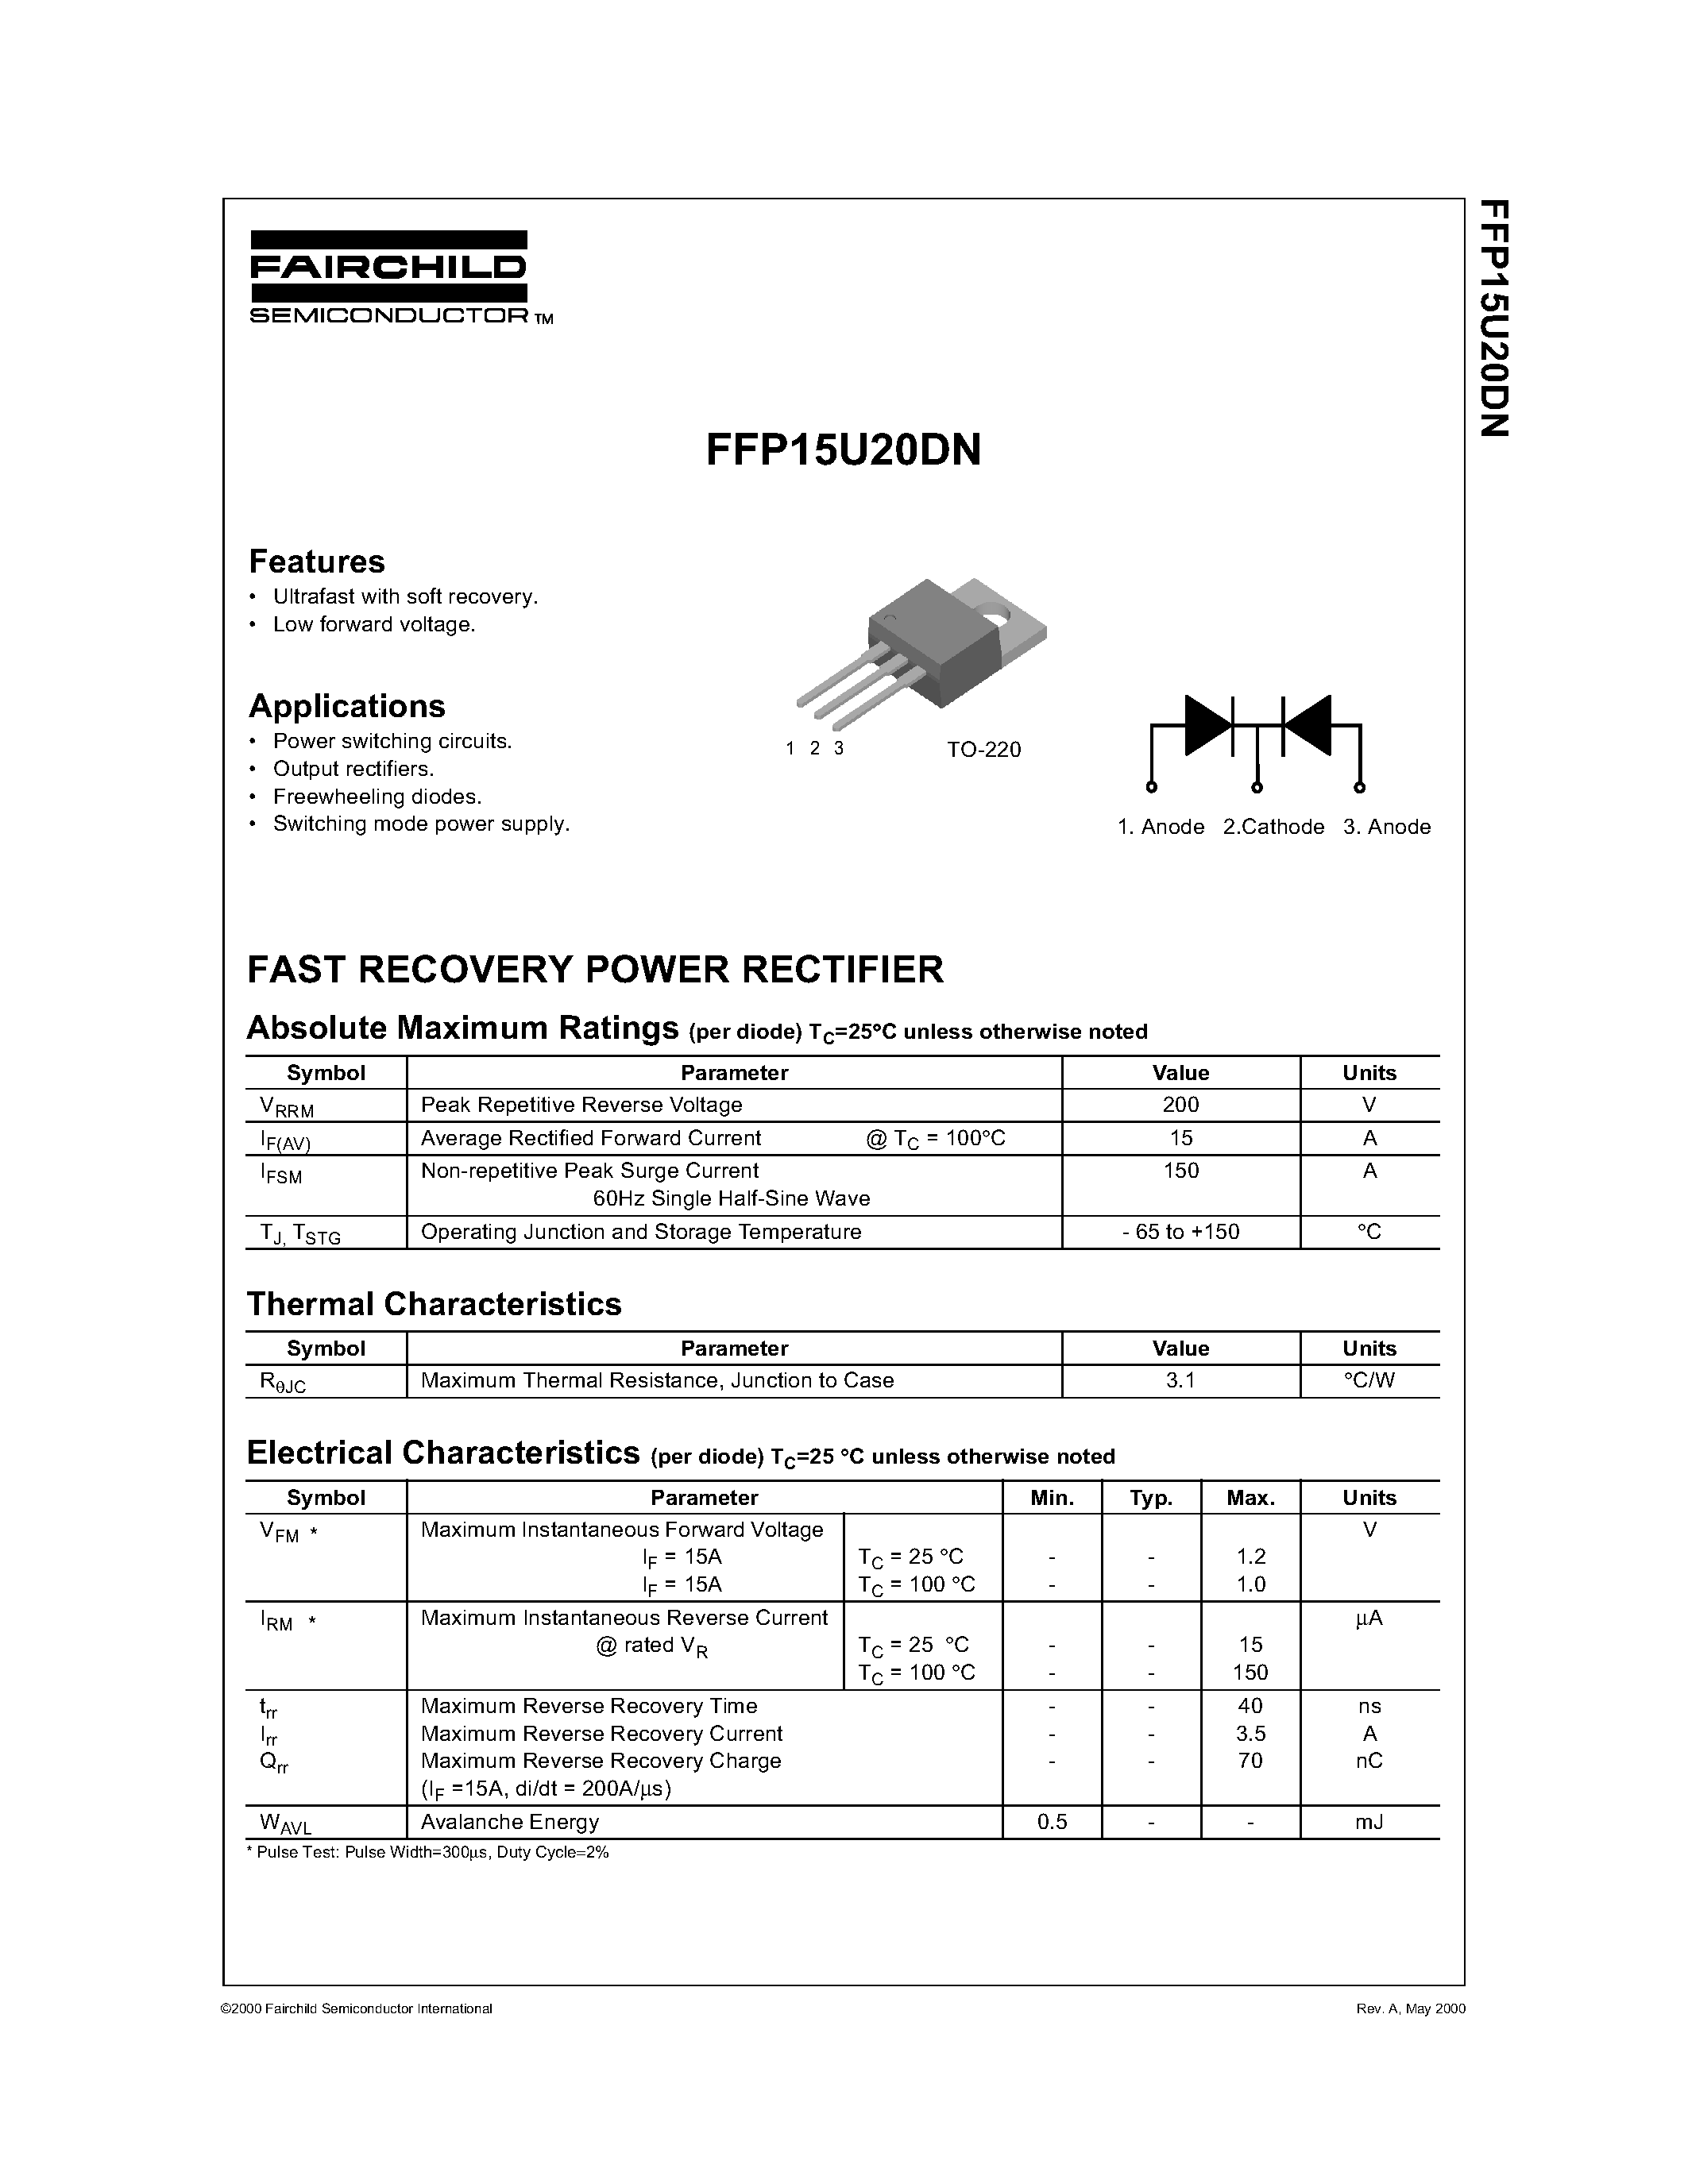 Даташит FFP15U20DN-FAST RECOVERY POWER RECTIFIER страница 1